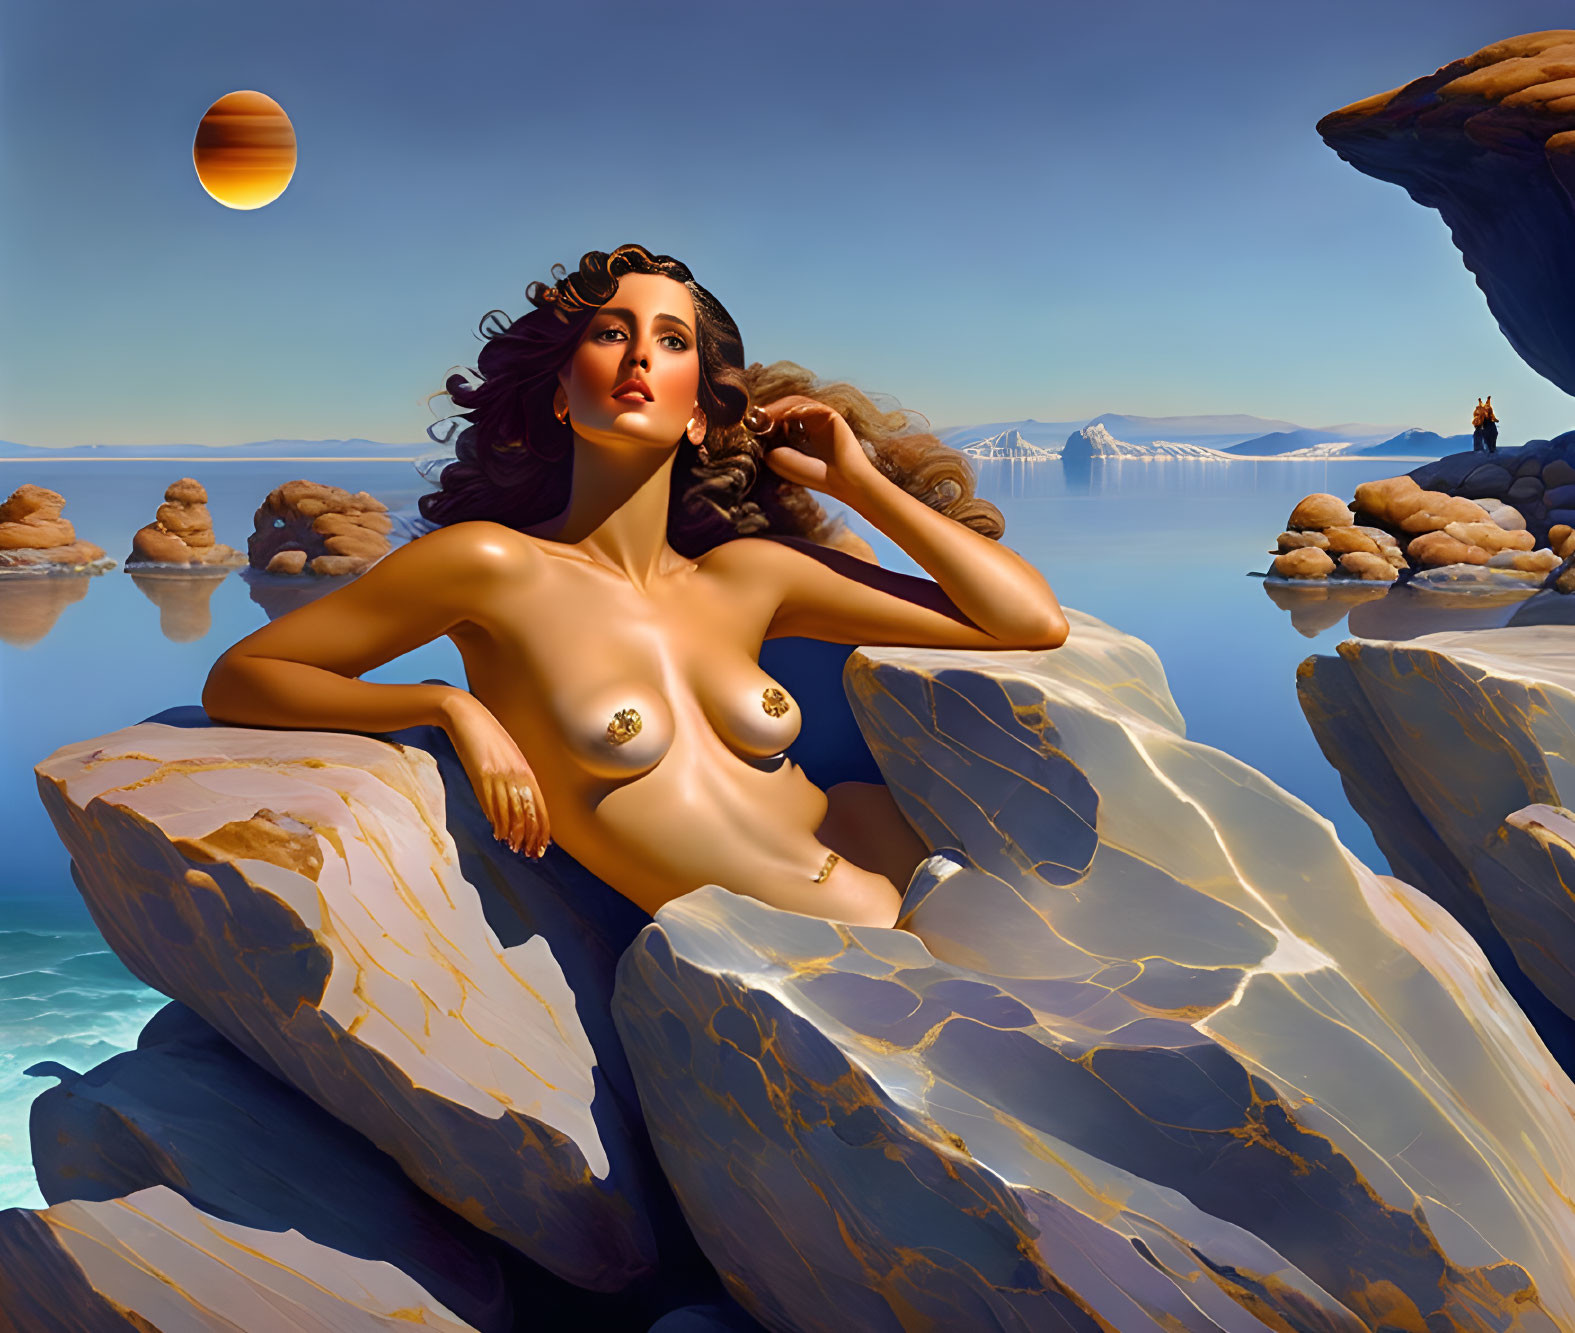 Digital artwork of woman reclining on rocky formations by calm sea with planet in sky